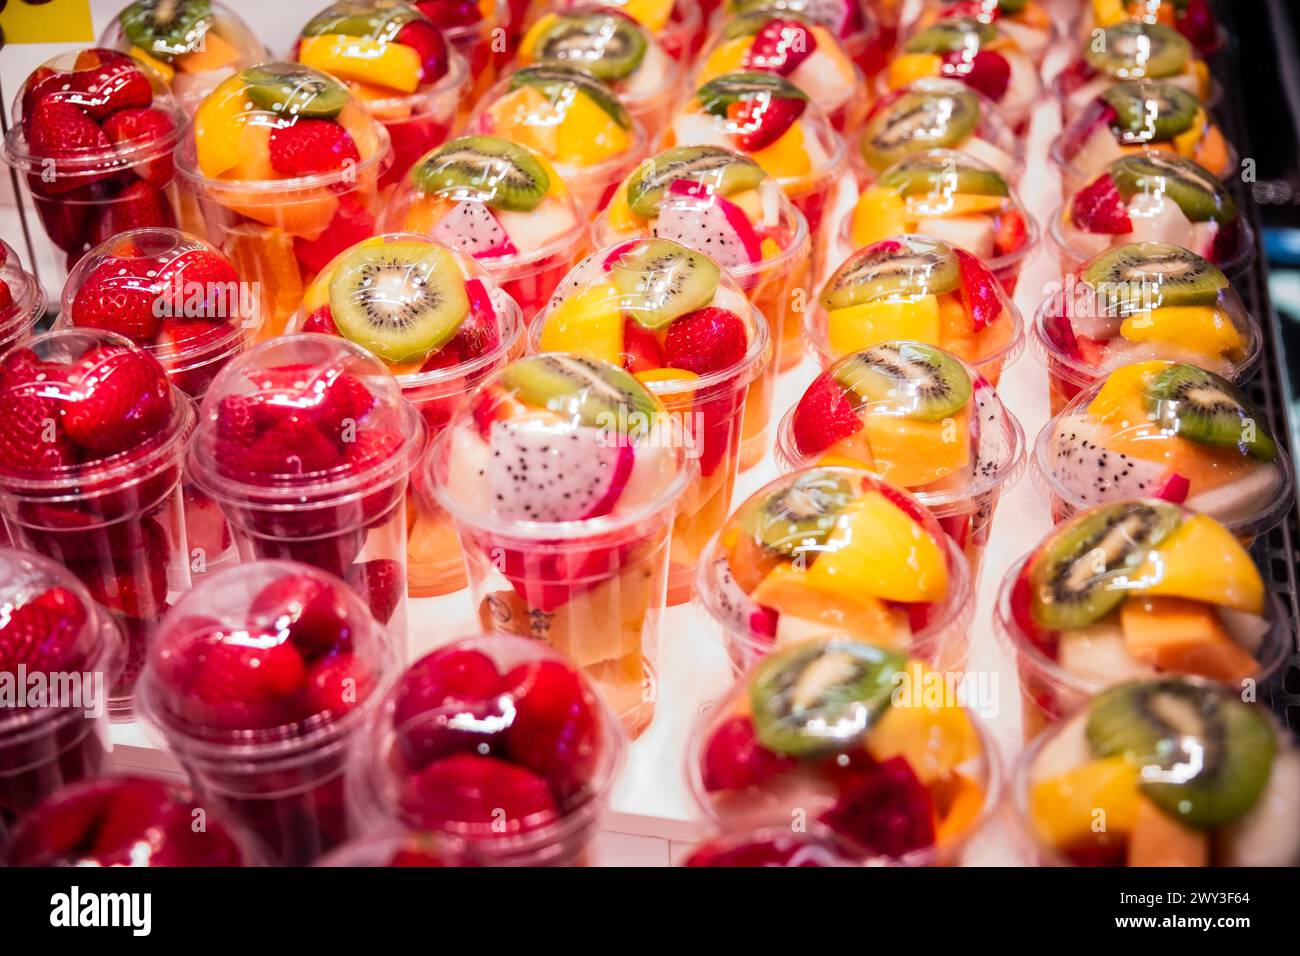 Fruit salad in plastic packaging at a market in Barcelona Stock Photo